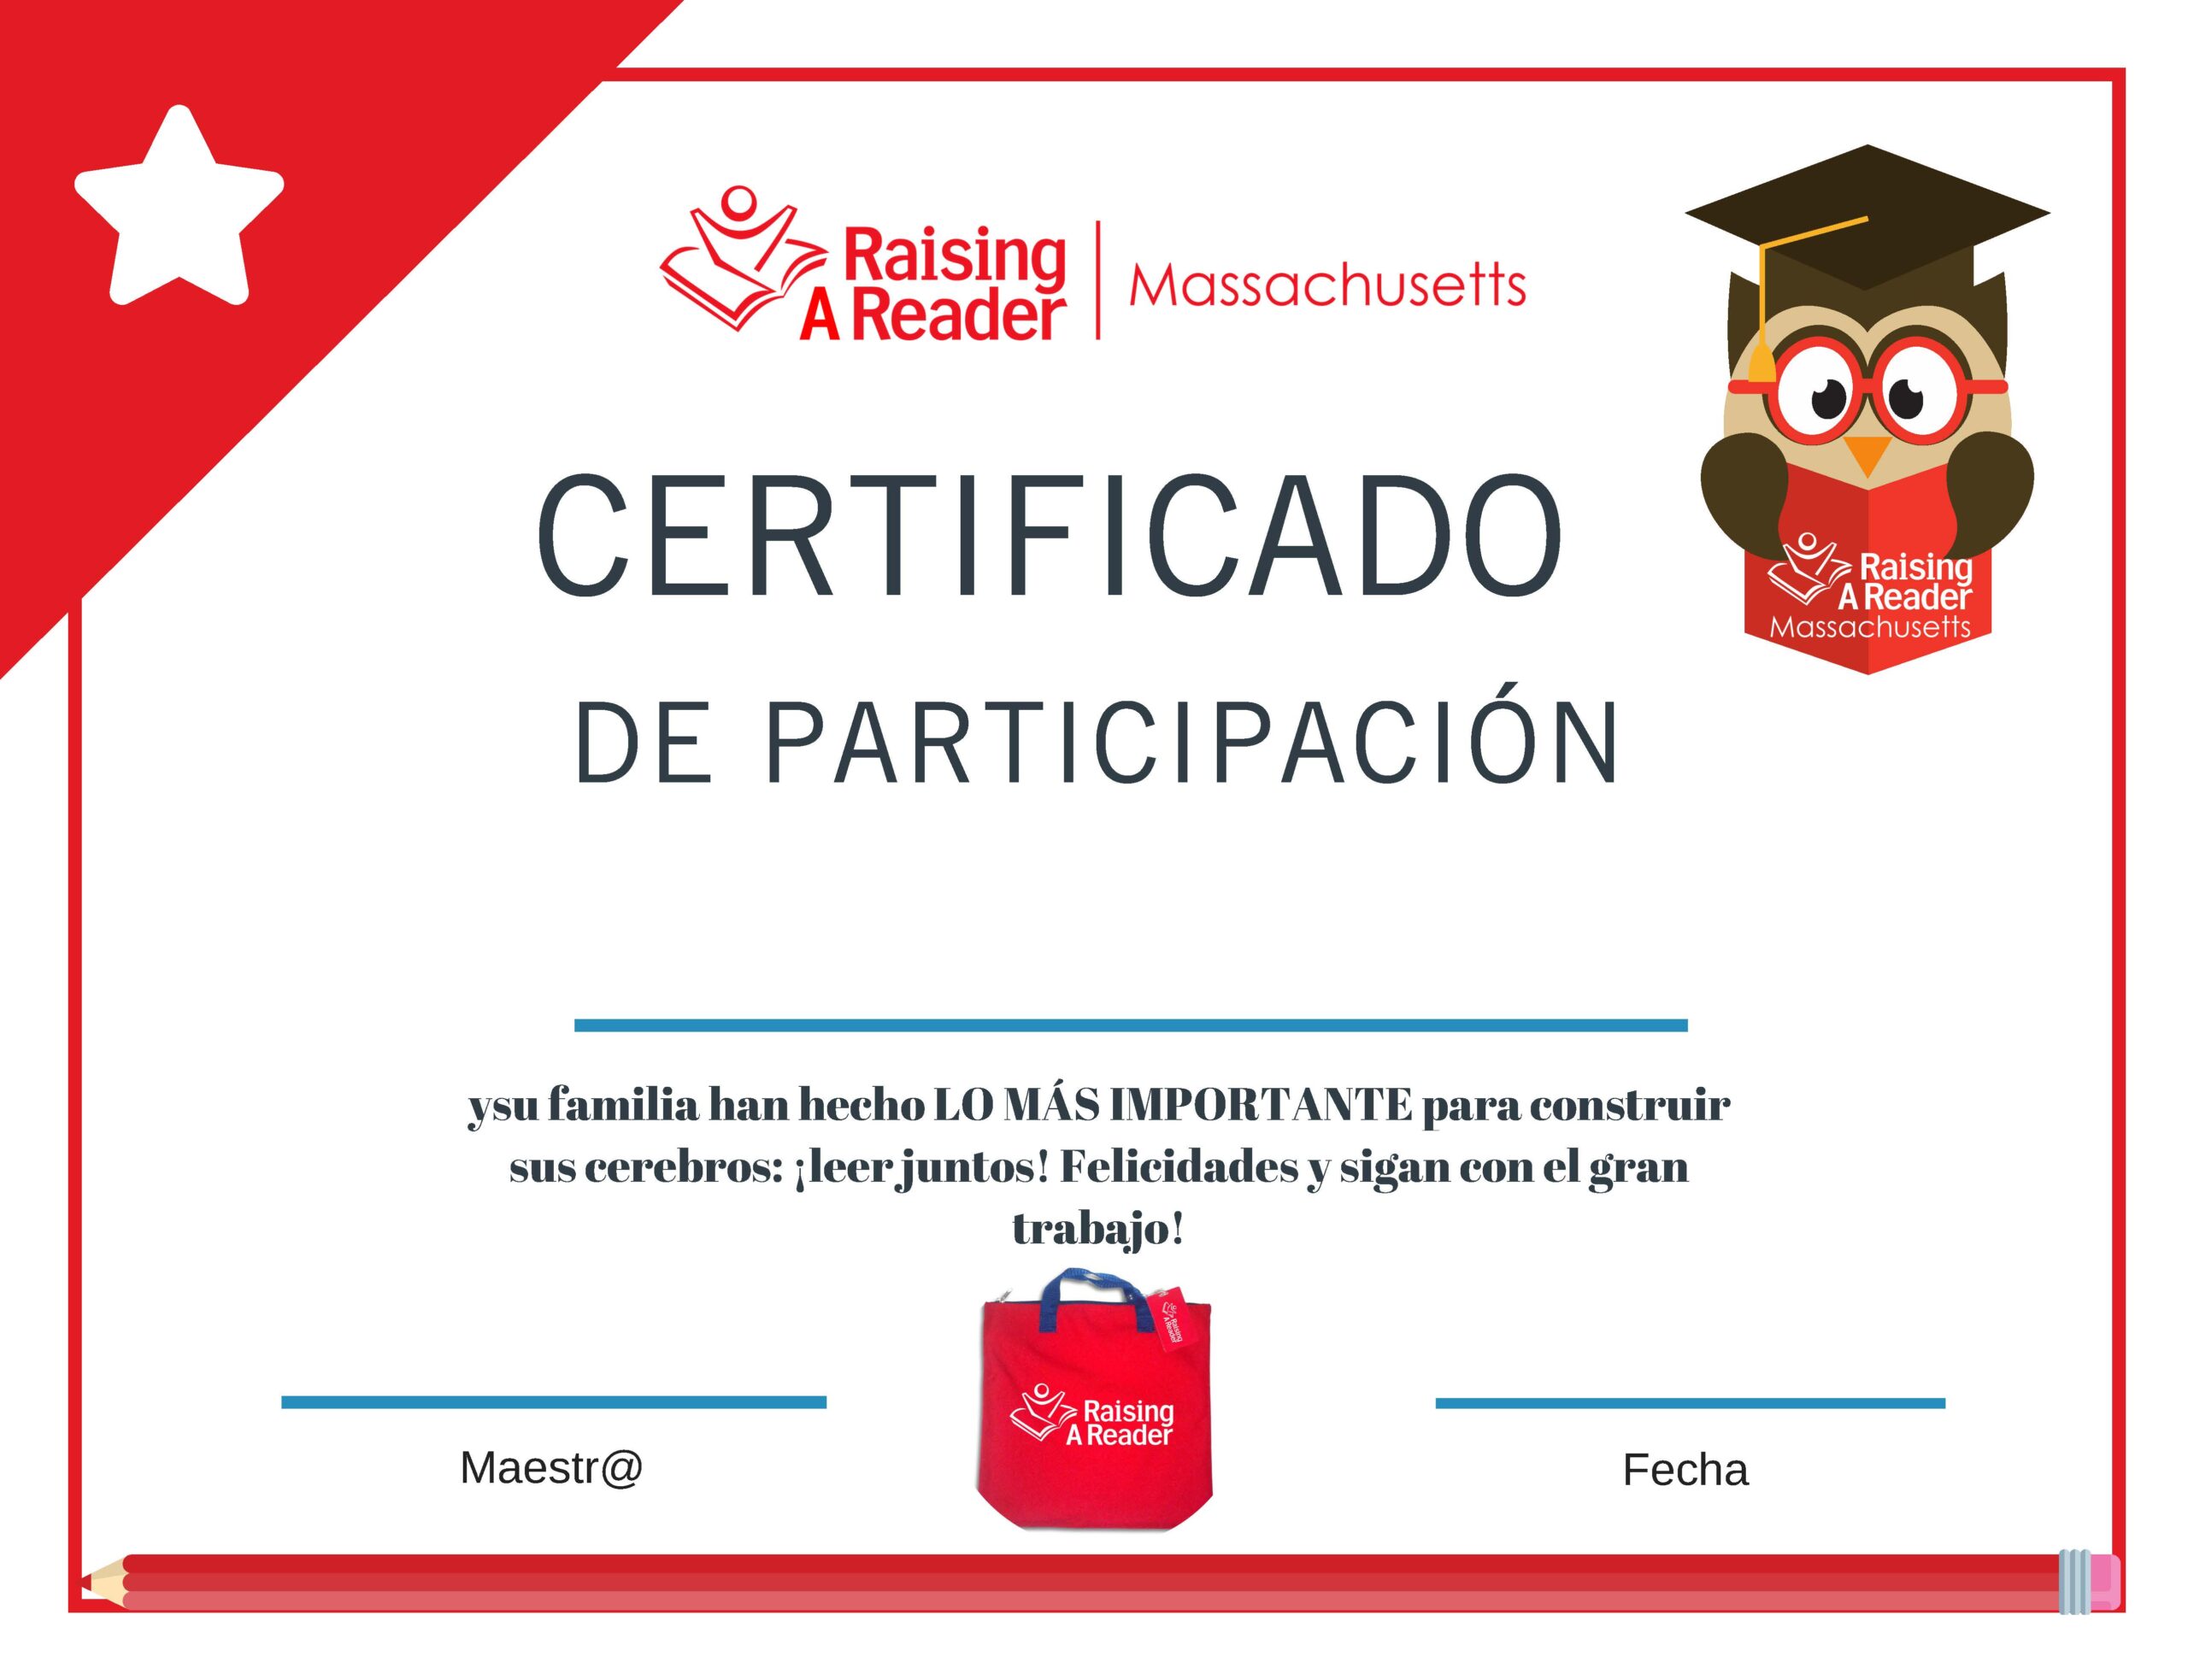 End of the year certificate for Red Bag program in Spanish